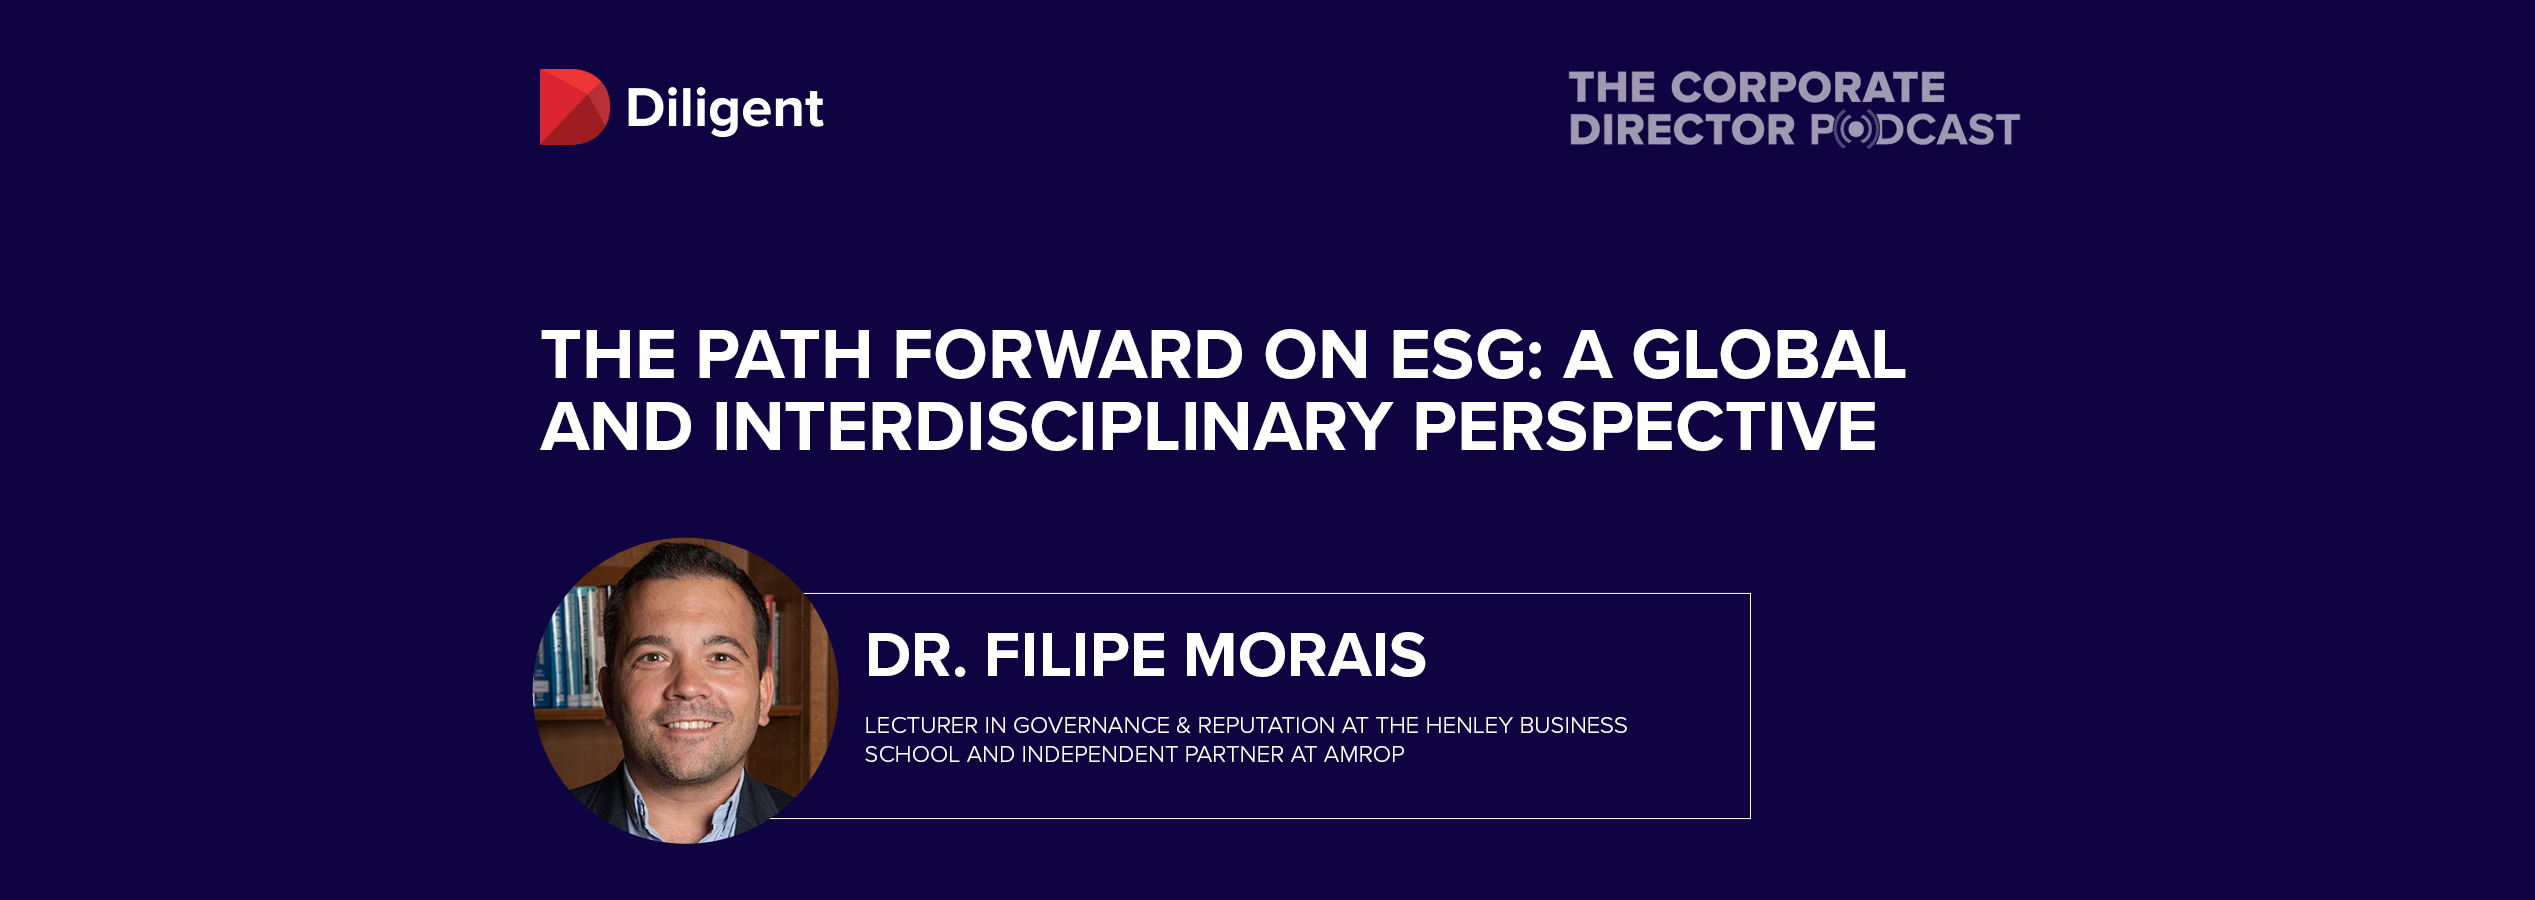 The Path Forward on ESG: A Global and Interdisciplinary Perspective